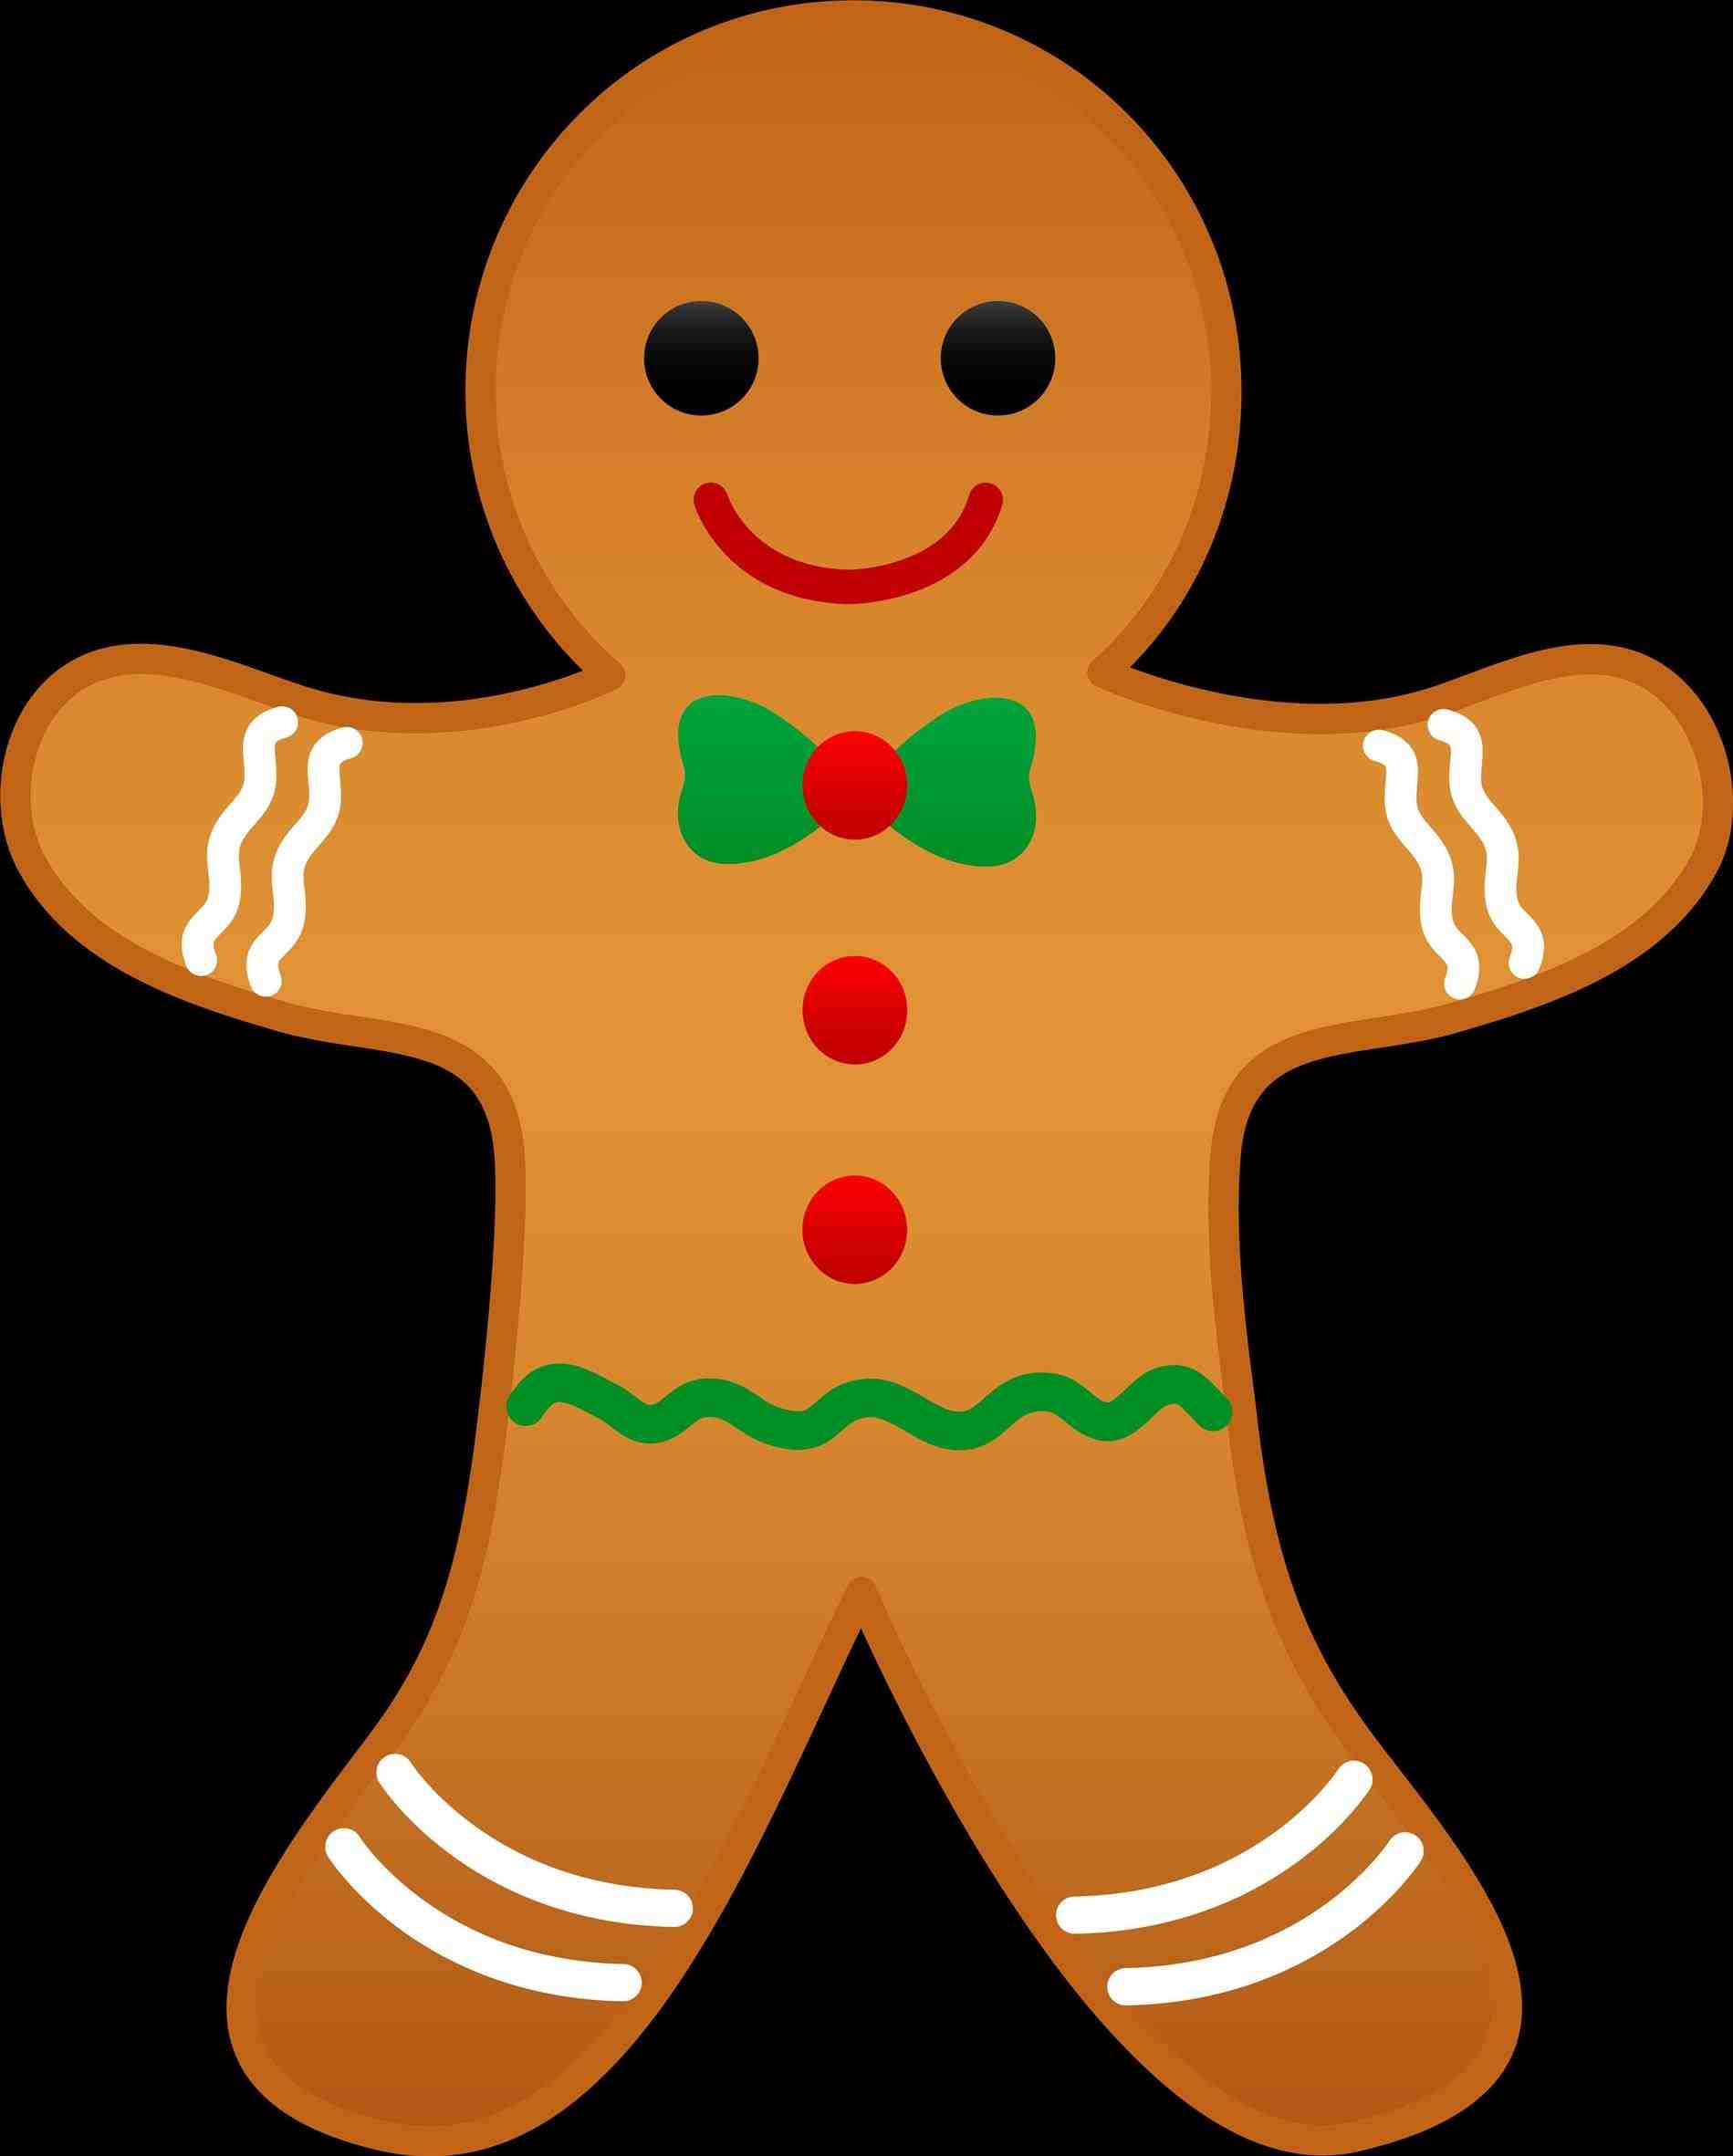 Christmas Gingerbread Man Clipart at GetDrawings Free download